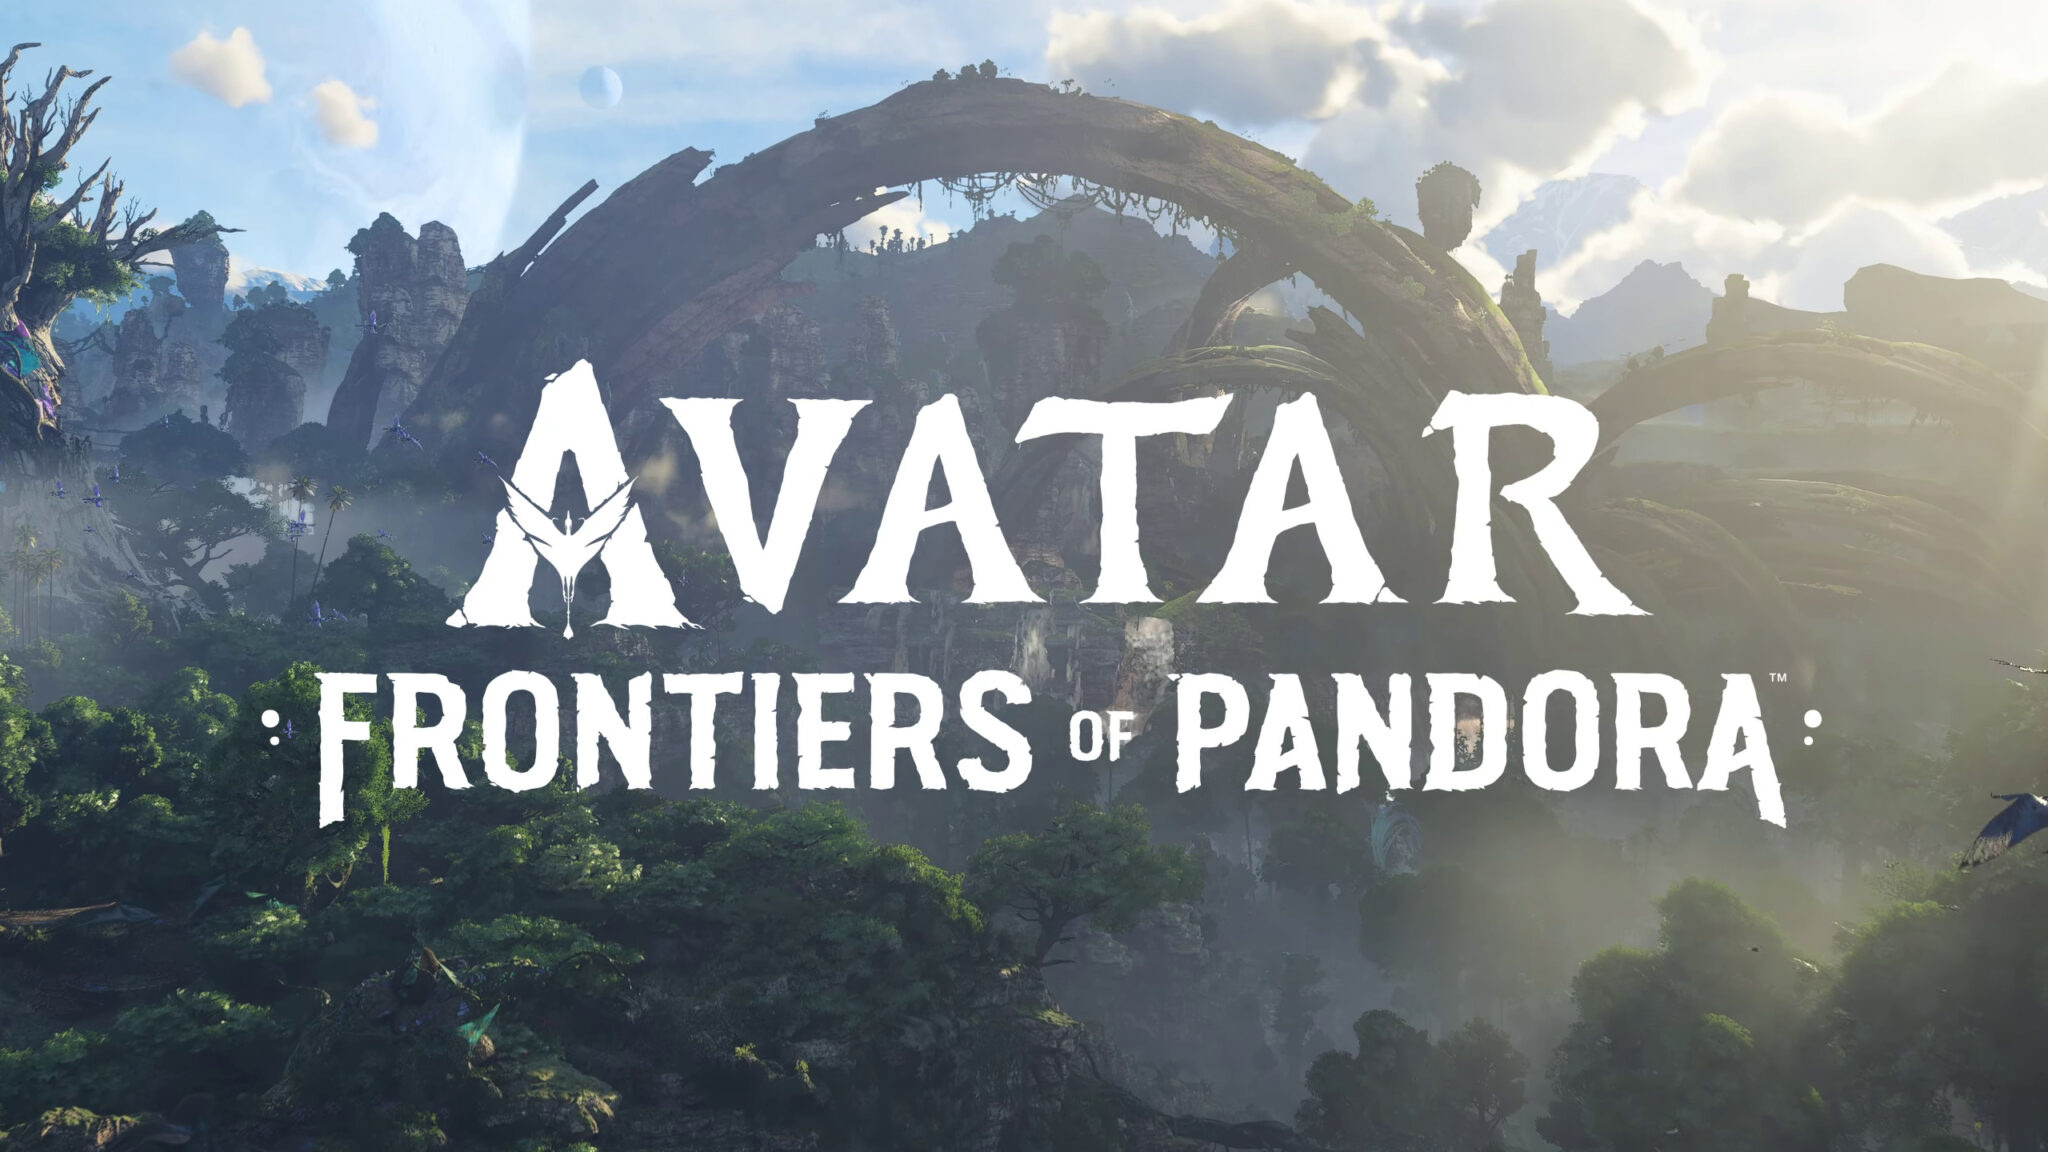 Avatar: Frontiers of Pandora: Powered by Ubisoft Snowdrop, Interactive shaders, A never-before-seen part of Pandora. 2050x1160 HD Wallpaper.